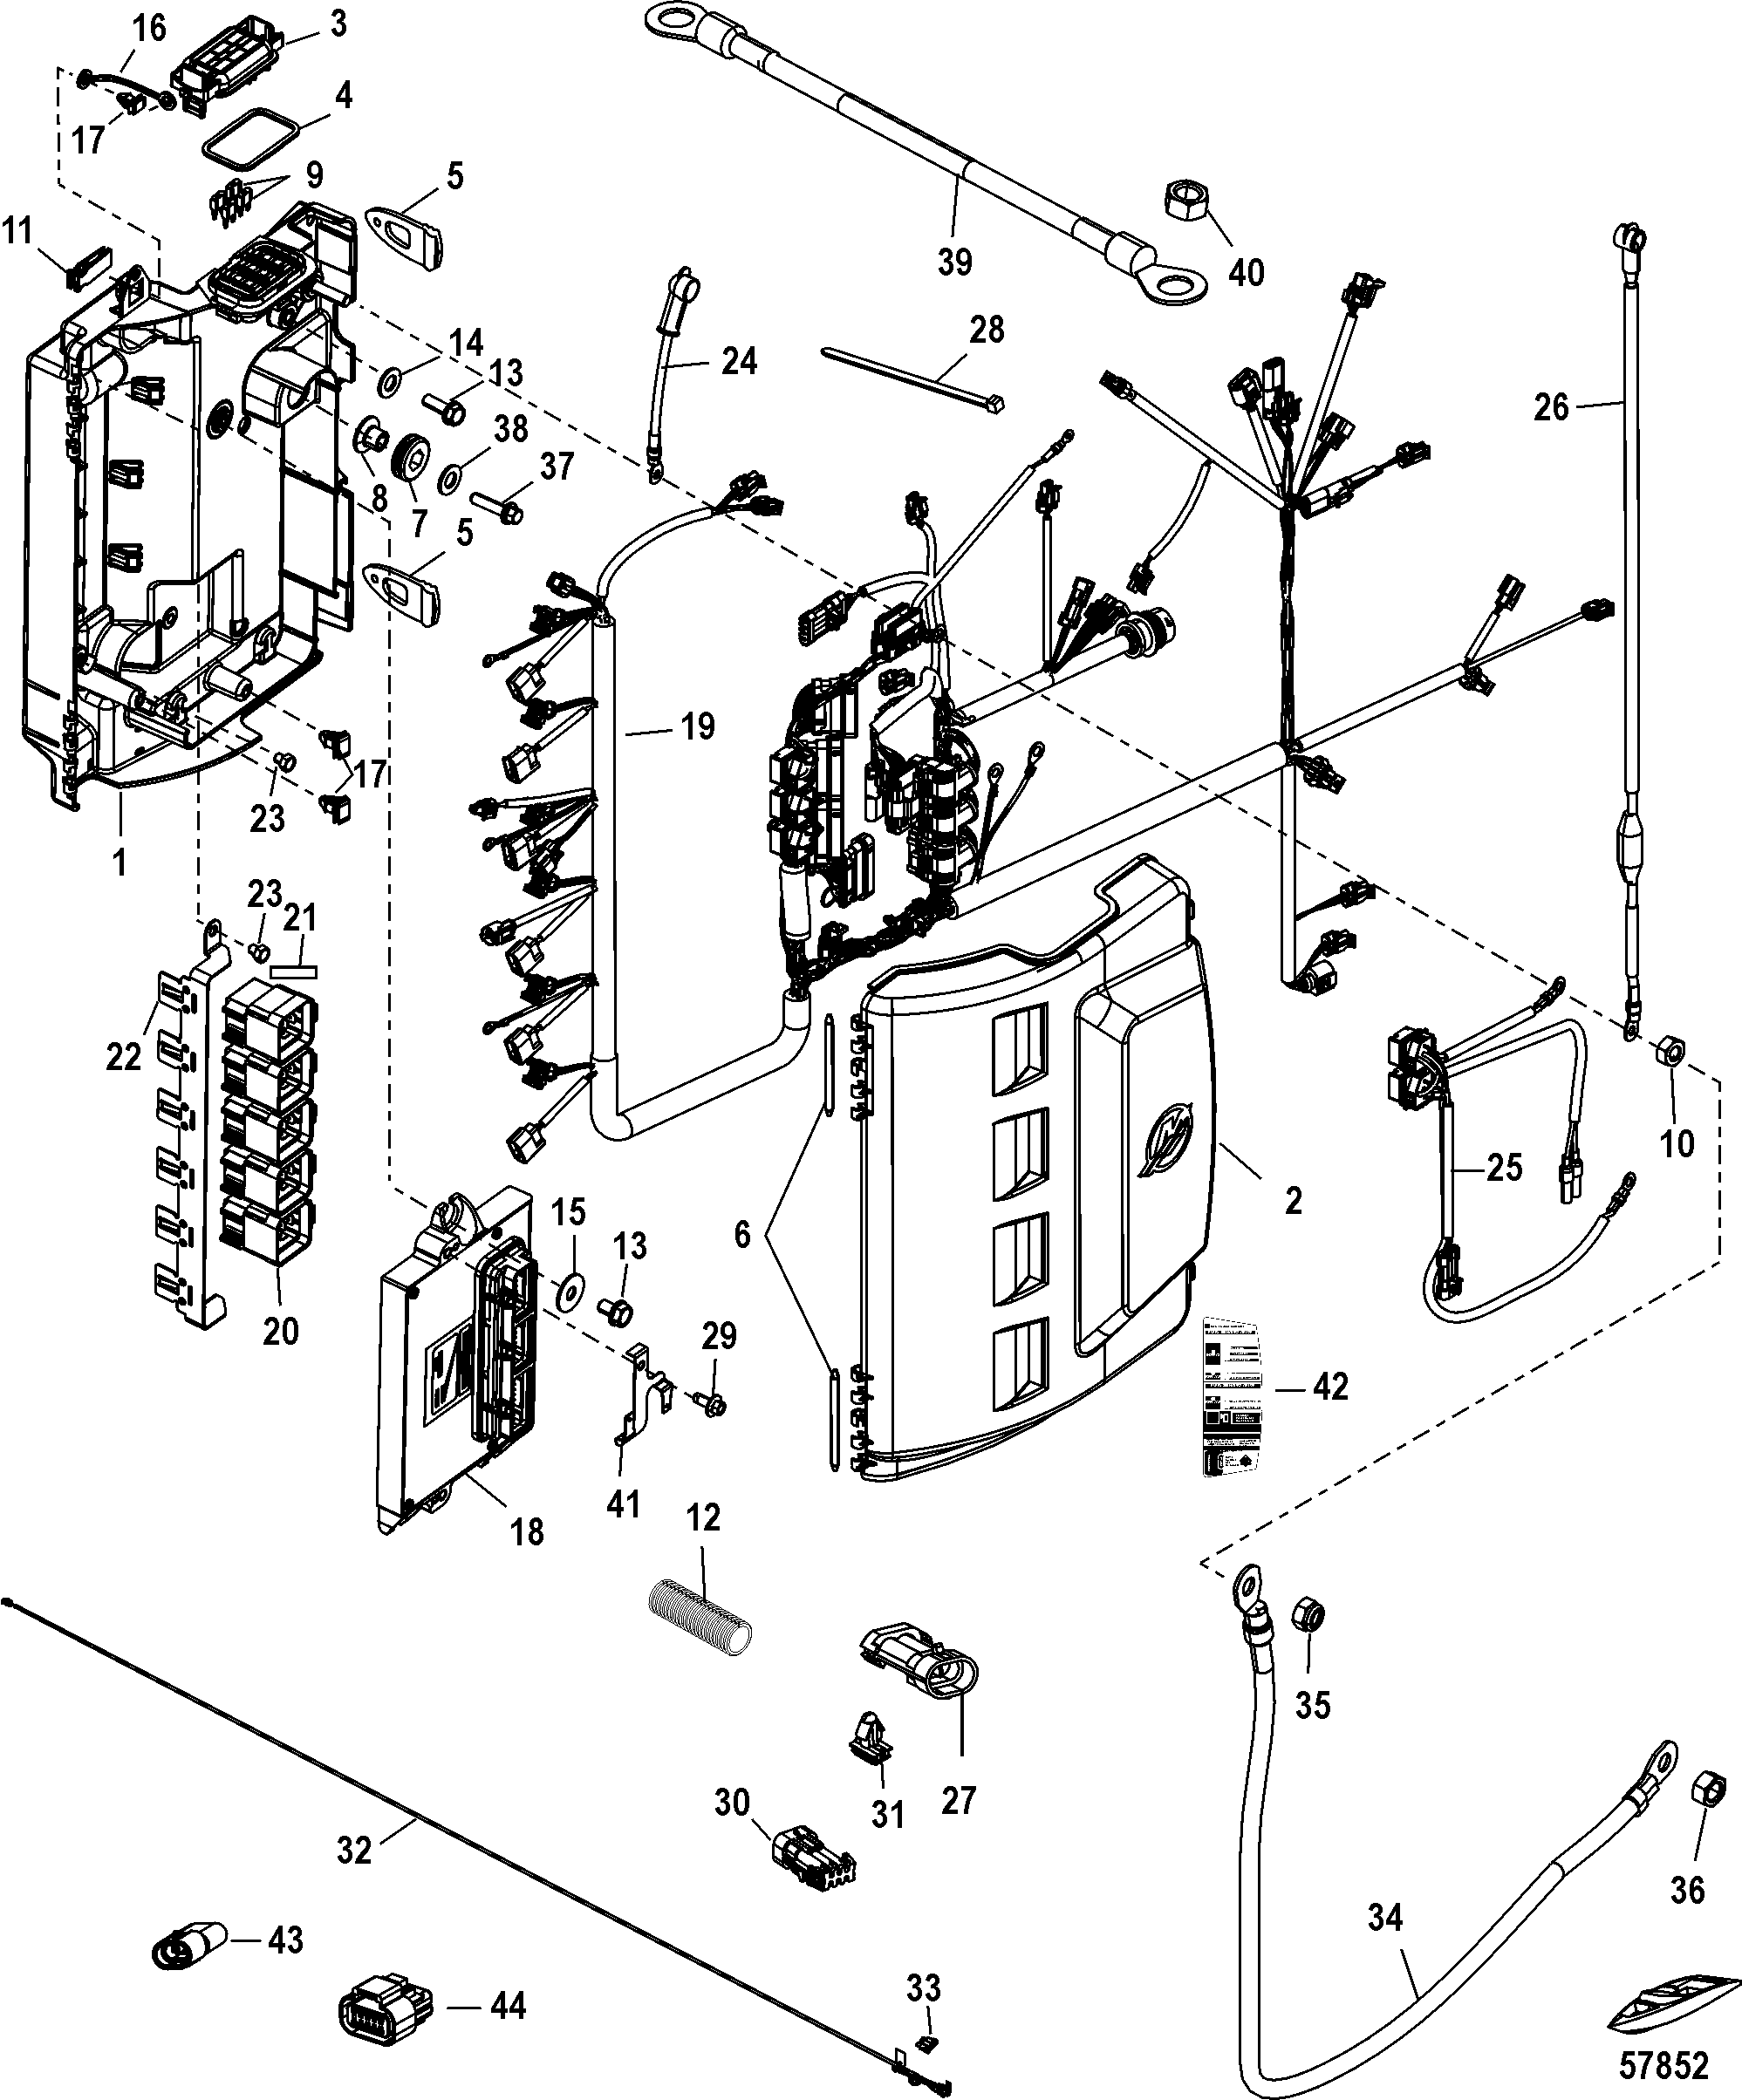 Electrical Box Components